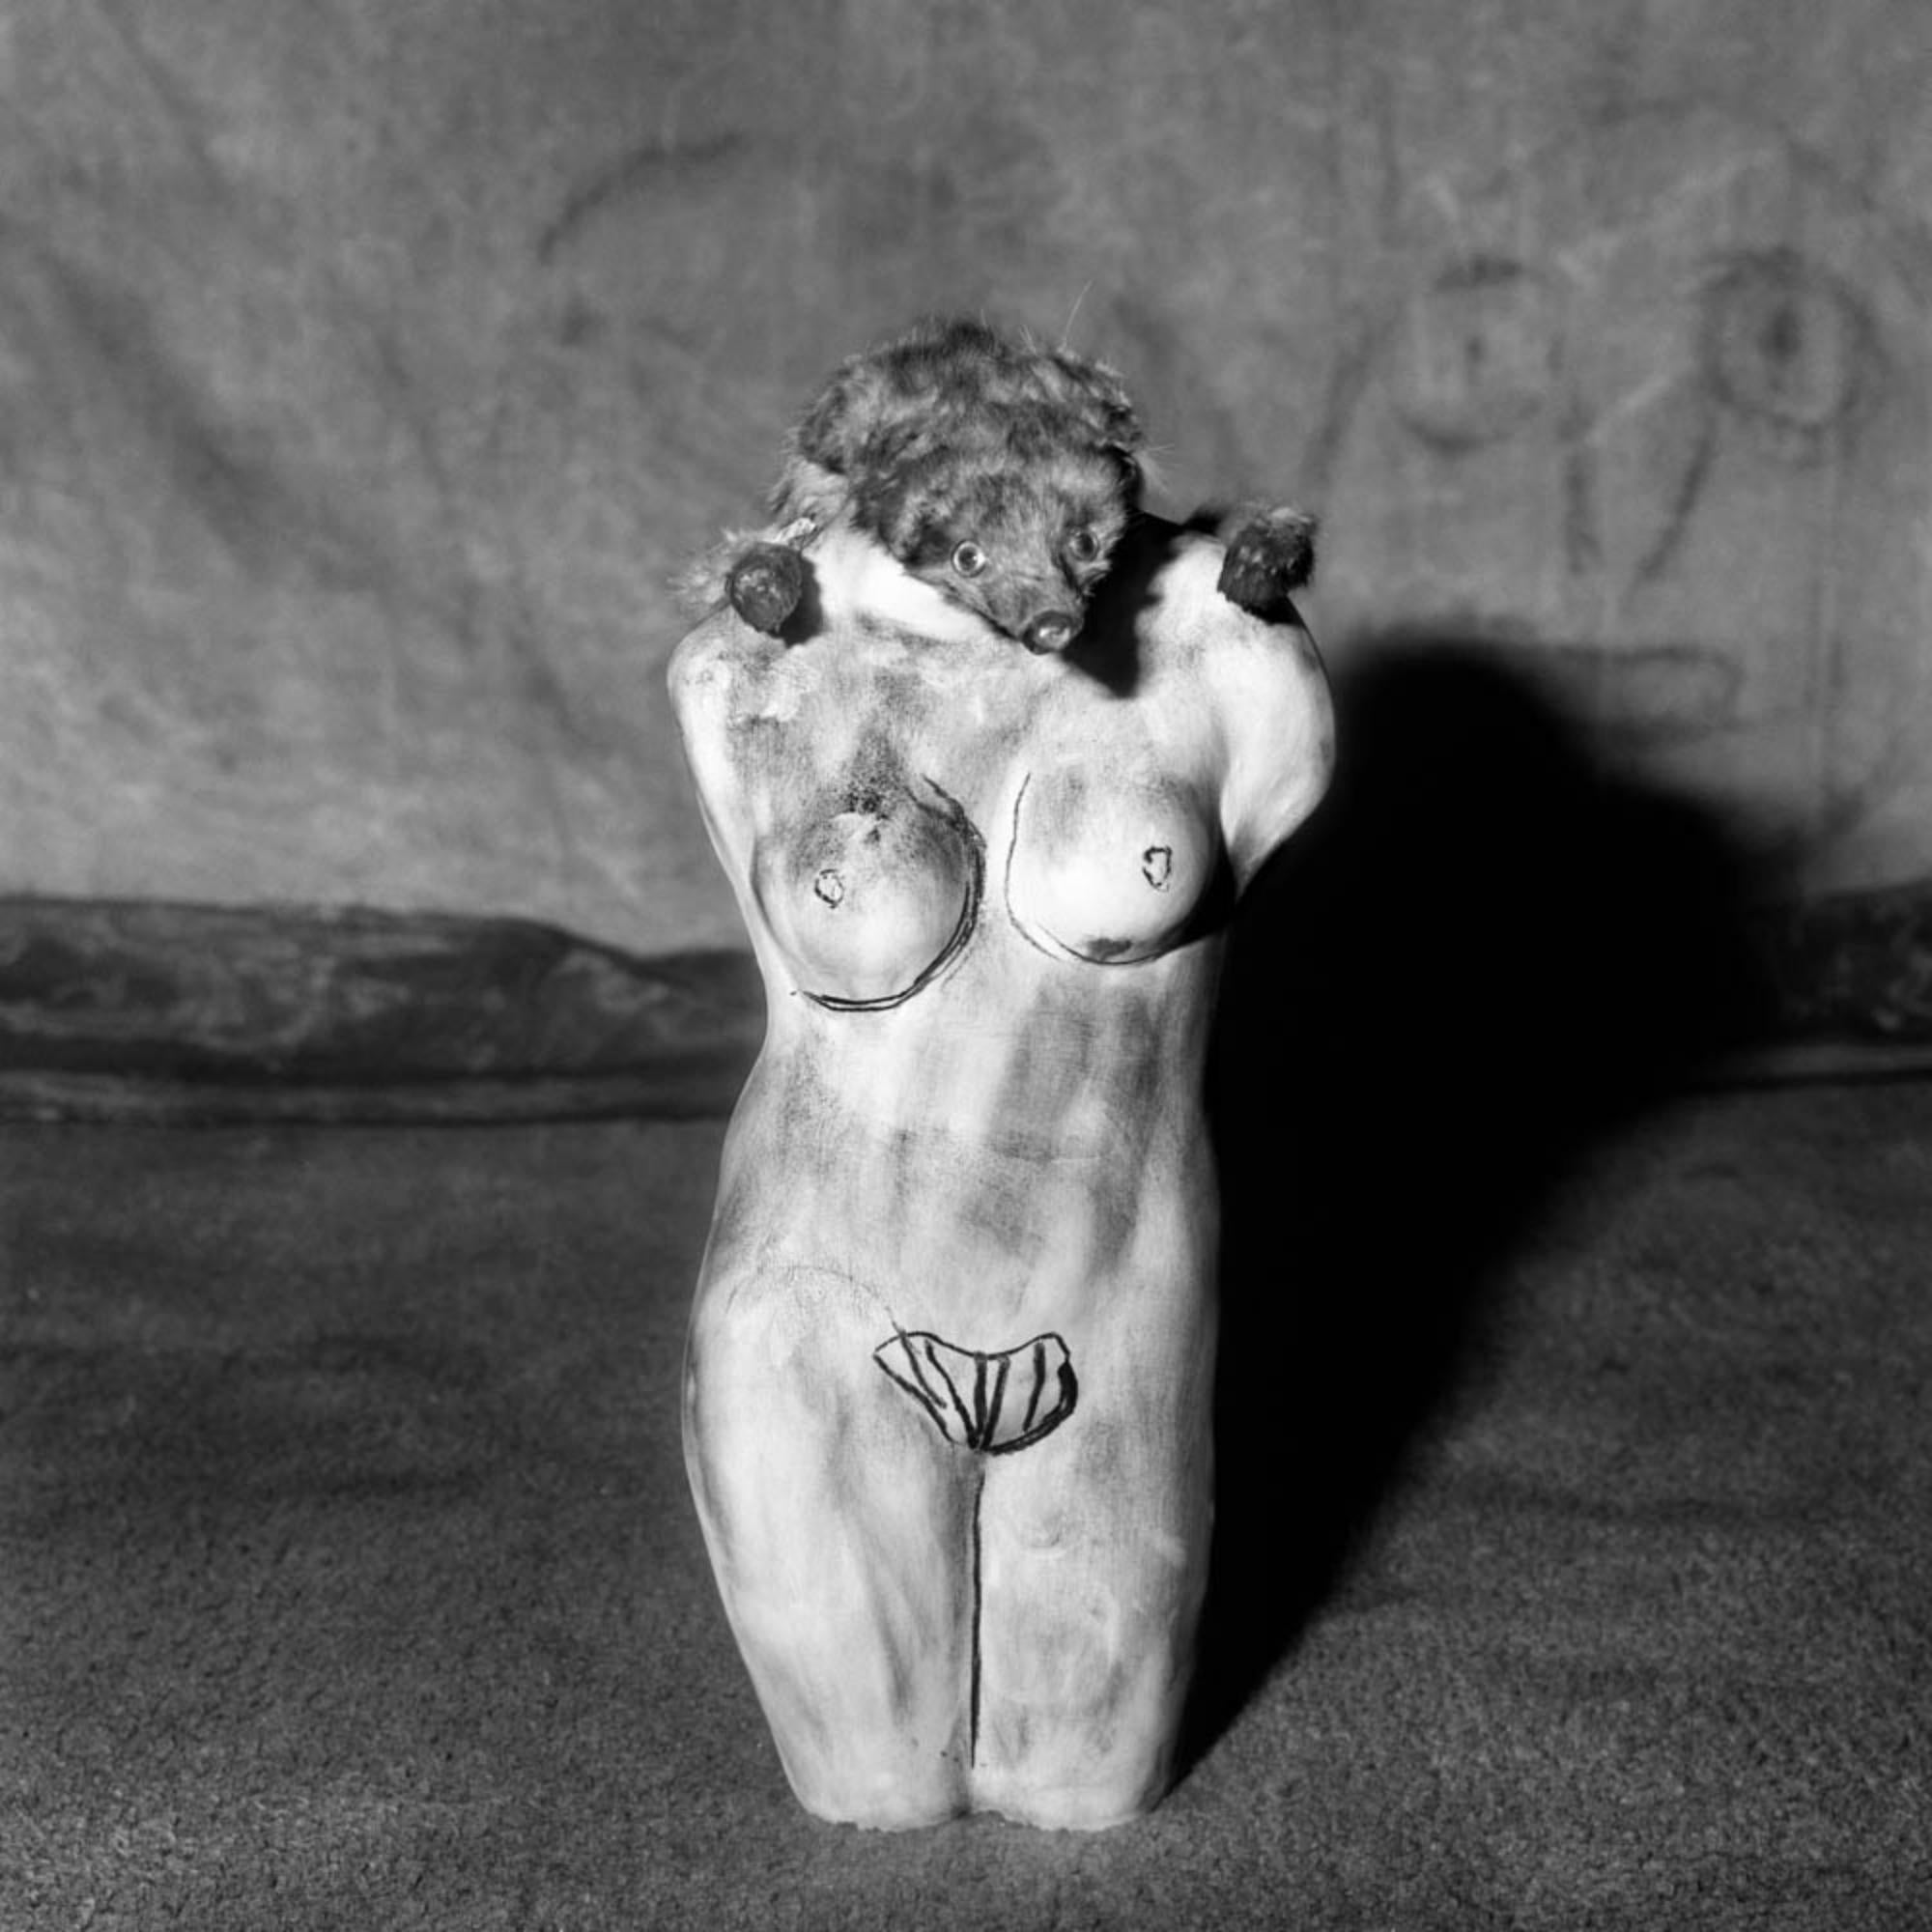 Roger BALLEN
Metamorphosis, from the series 'Boarding House', 2006
Vintage silver gelatin print
Image 45 x 45 cm (17 3/4 x 17 3/4 in.)
Sheet 50 x 50 cm (19 3/4 x 19 3/4 in.)
Edition of 10 (#5/10)
Signed and dated verso in pencil
Print